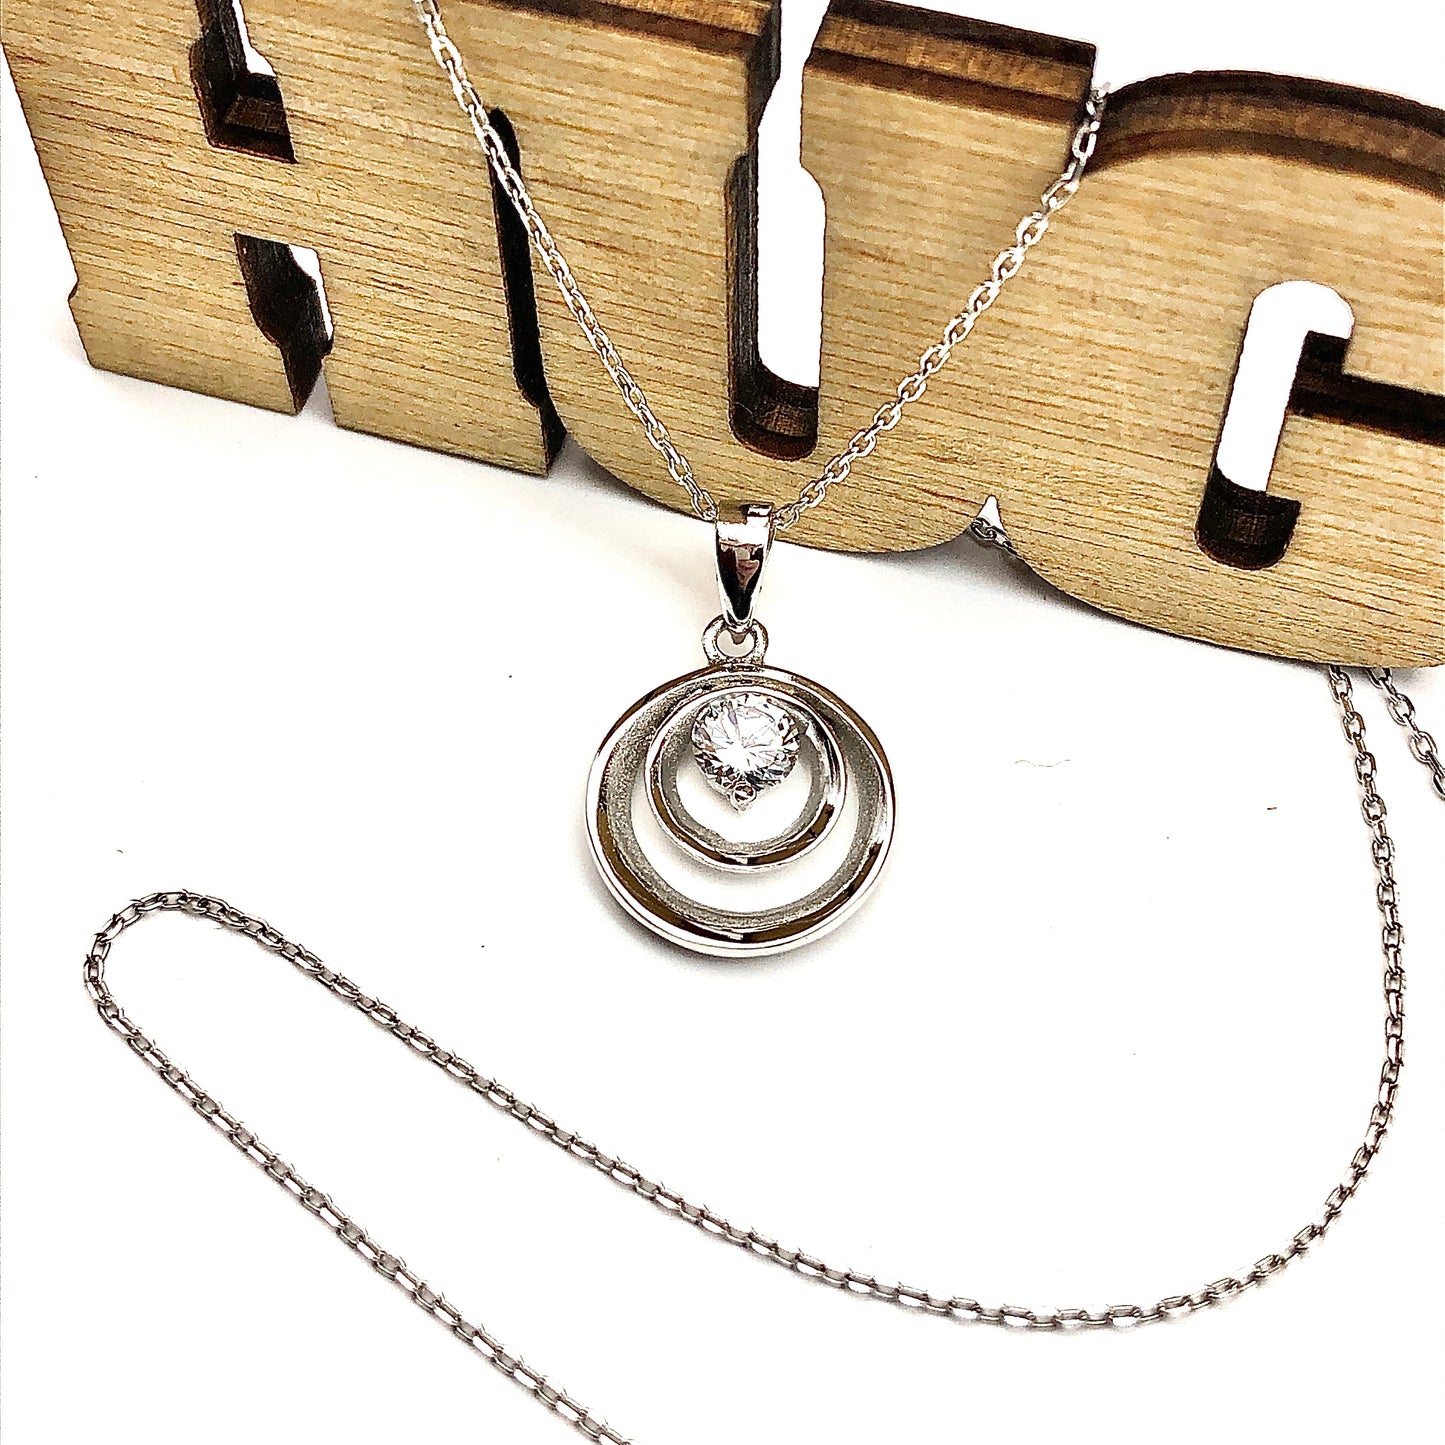 Blingschlingers Jewelry - Womens Adjustable Sterling Silver Sandblasted Circle Pendant Necklace